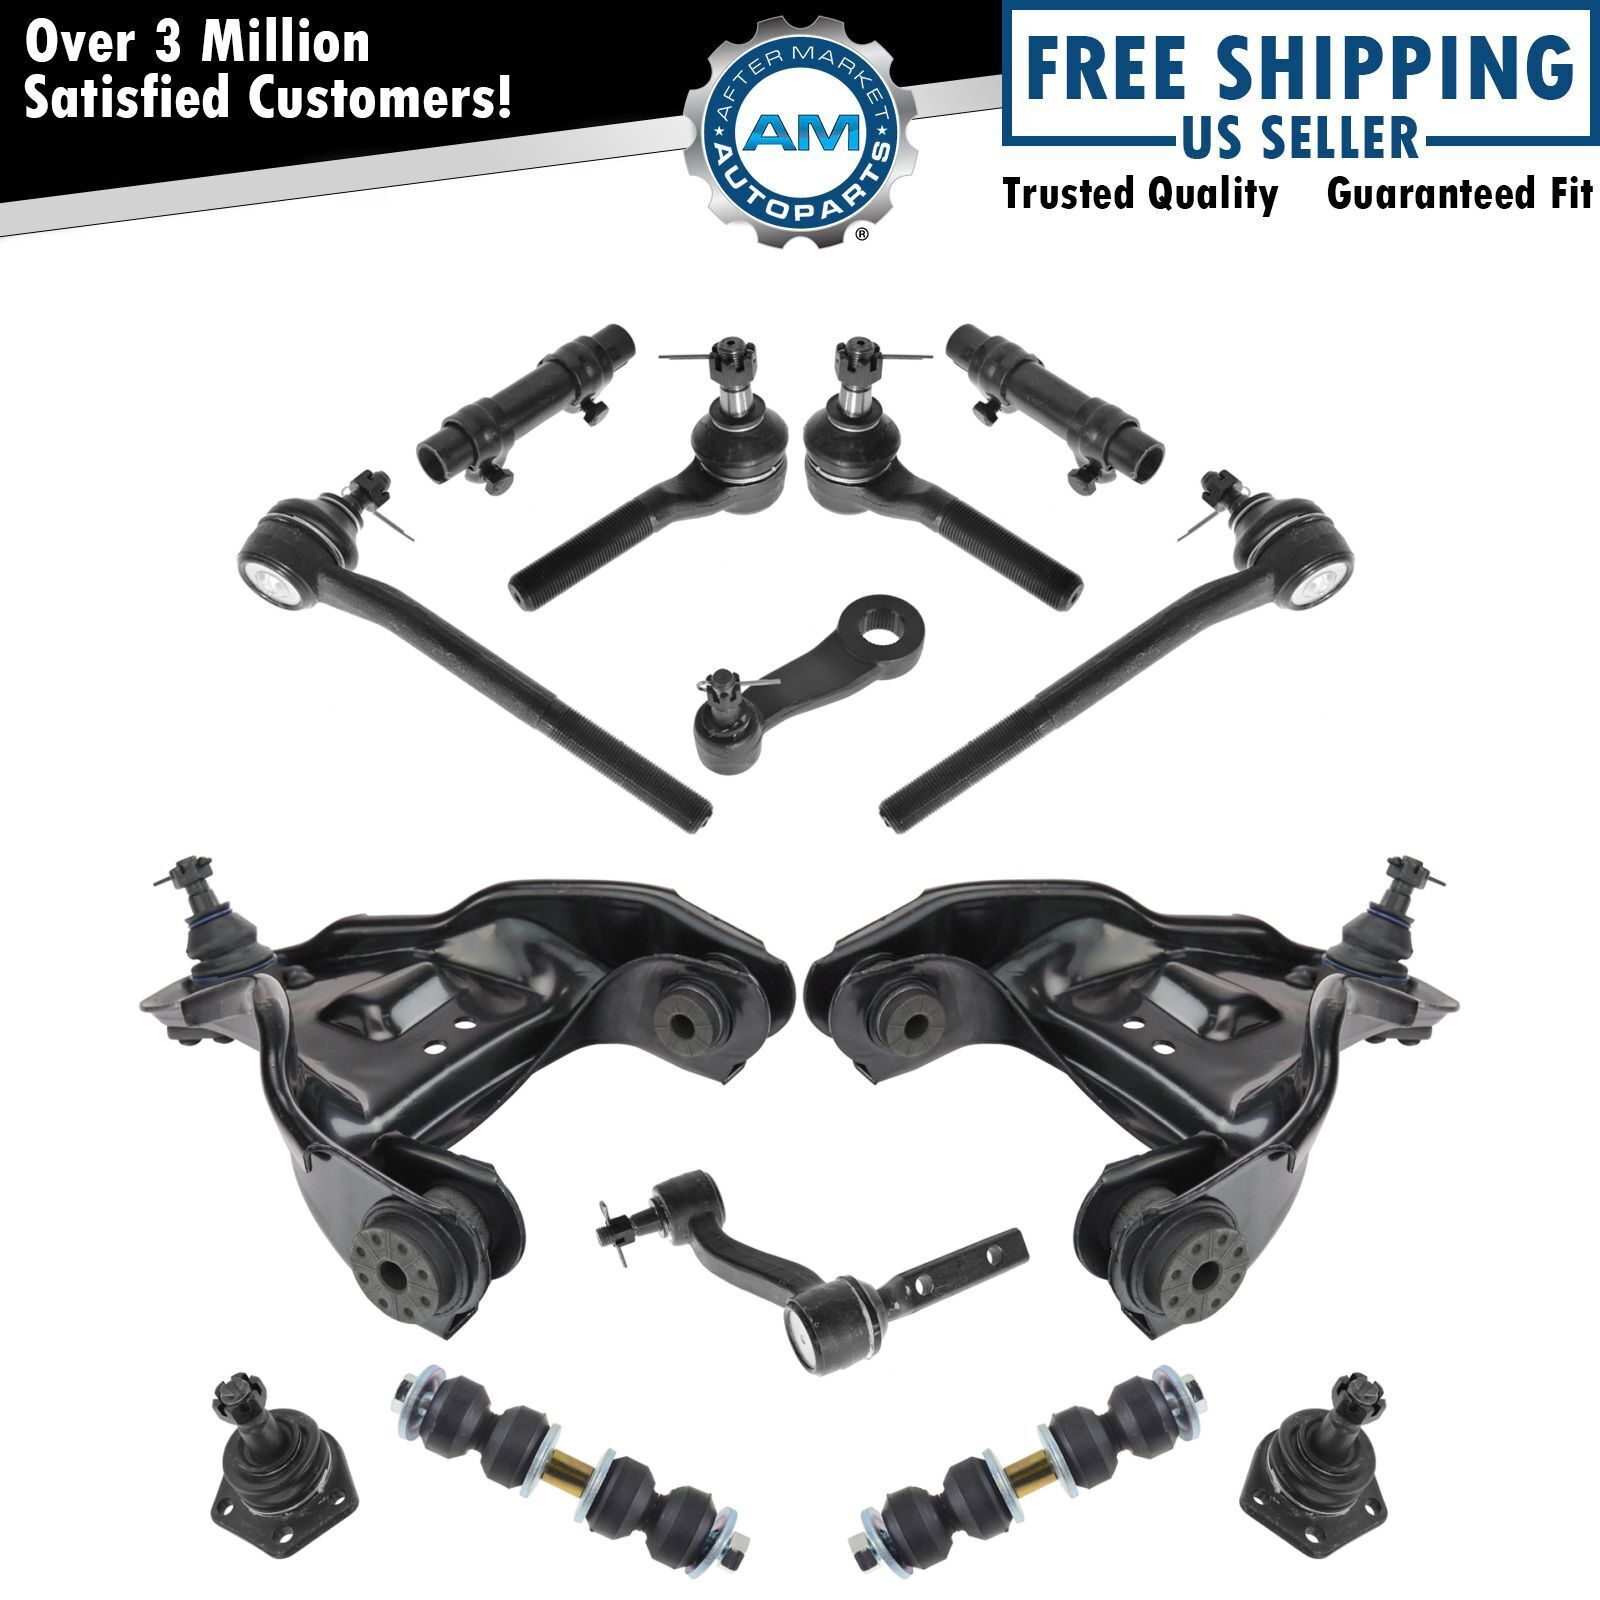 Control Arm Ball Joint 14pc Steering & Suspension Kit for 98-05 S10 Blazer Jimmy